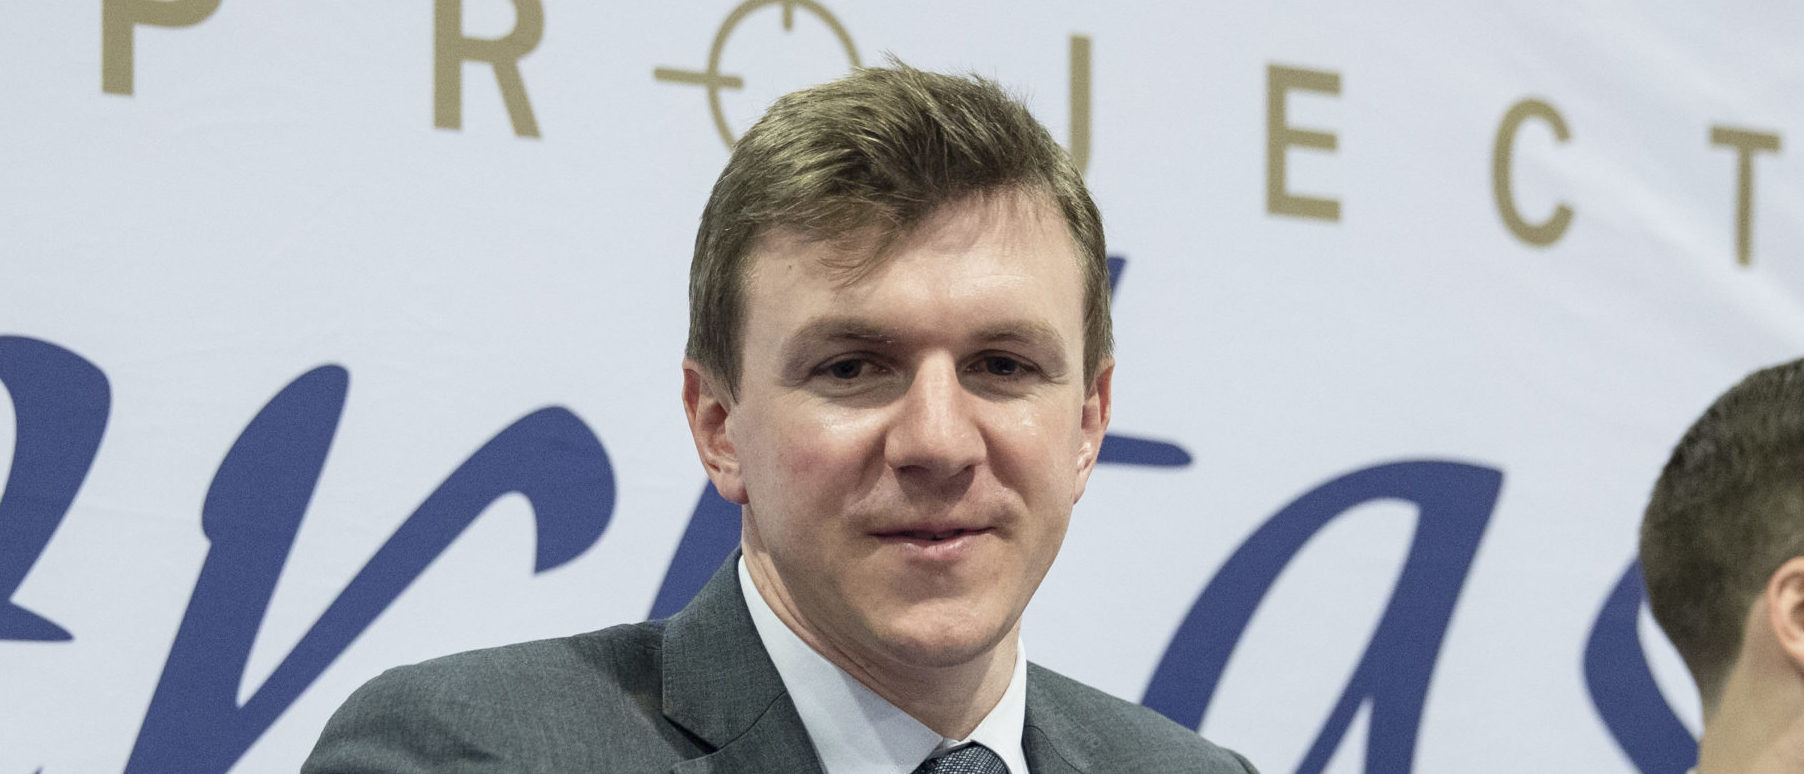 NATIONAL HARBOR, MD - FEBRUARY 28: James OKeefe, an American conservative political activist and founder of Project Veritas, meets with supporters during the Conservative Political Action Conference 2020 (CPAC) hosted by the American Conservative Union on February 28, 2020 in National Harbor, MD. (Photo by Samuel Corum/Getty Images)